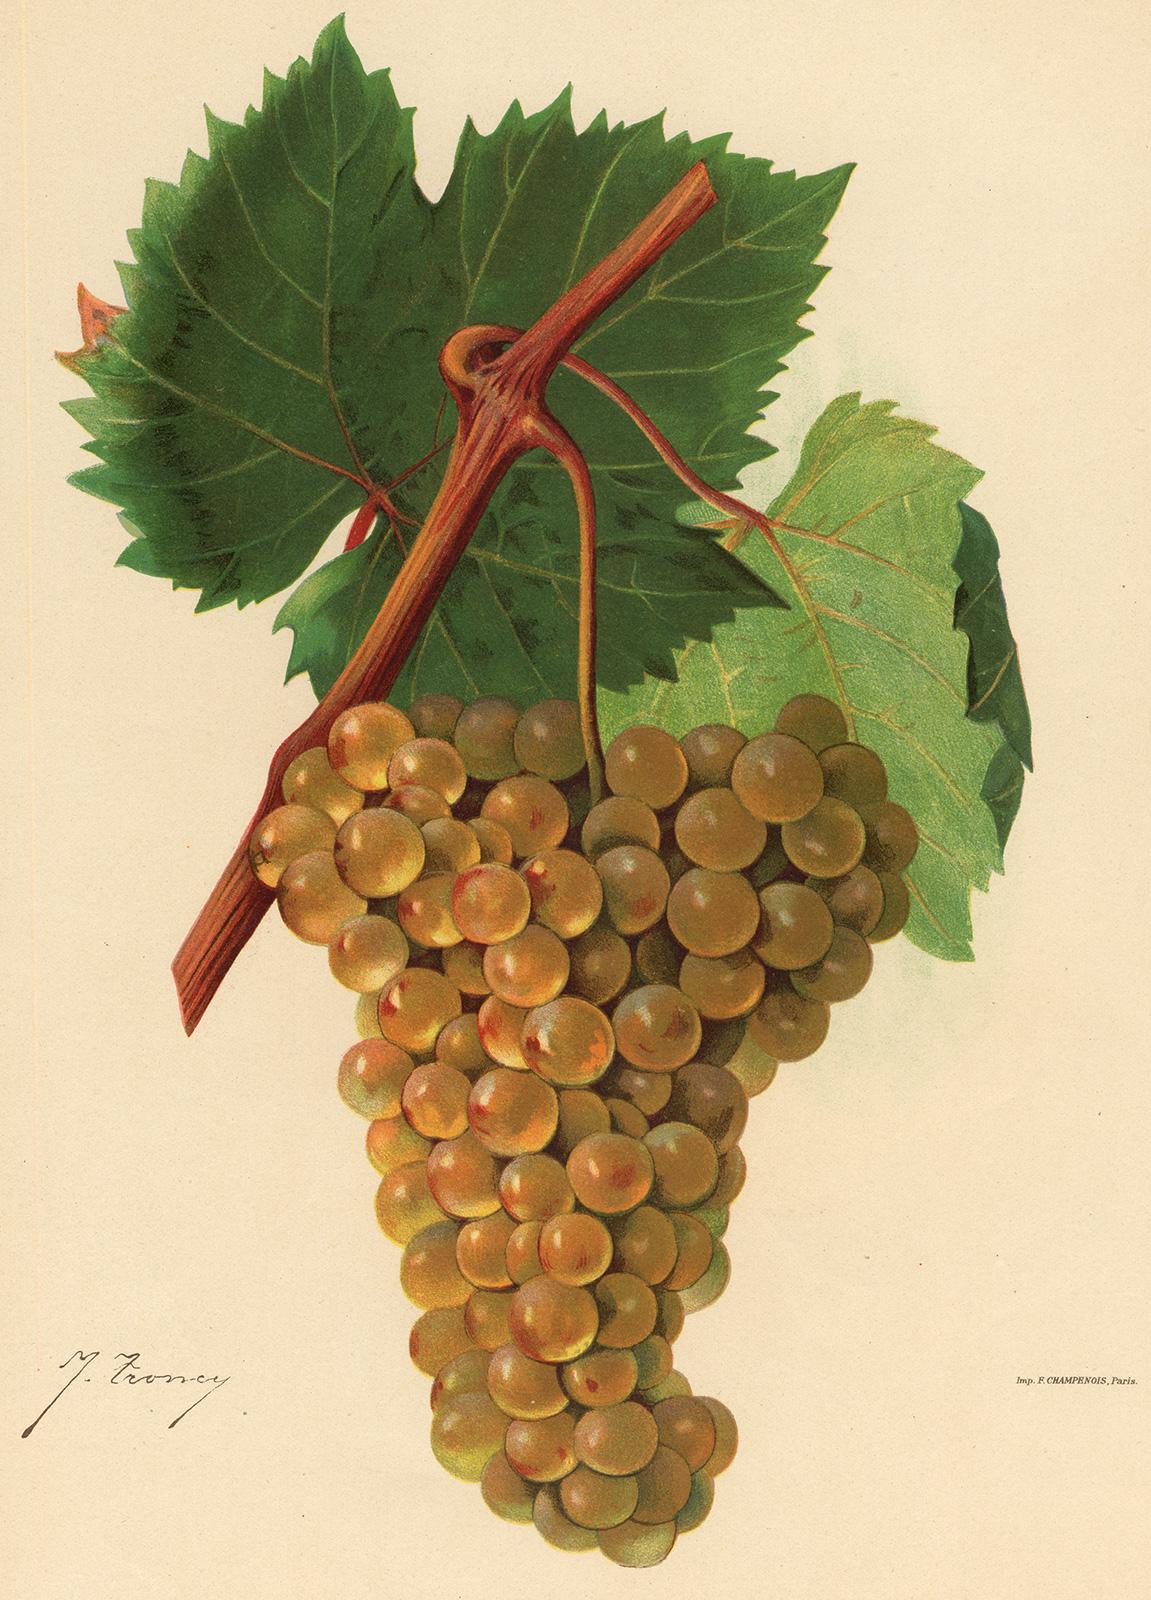 Victor Vermorel Print - St. Pierre Dore grape - Ampelography by Vermorel - Lithograph - Early 20th c